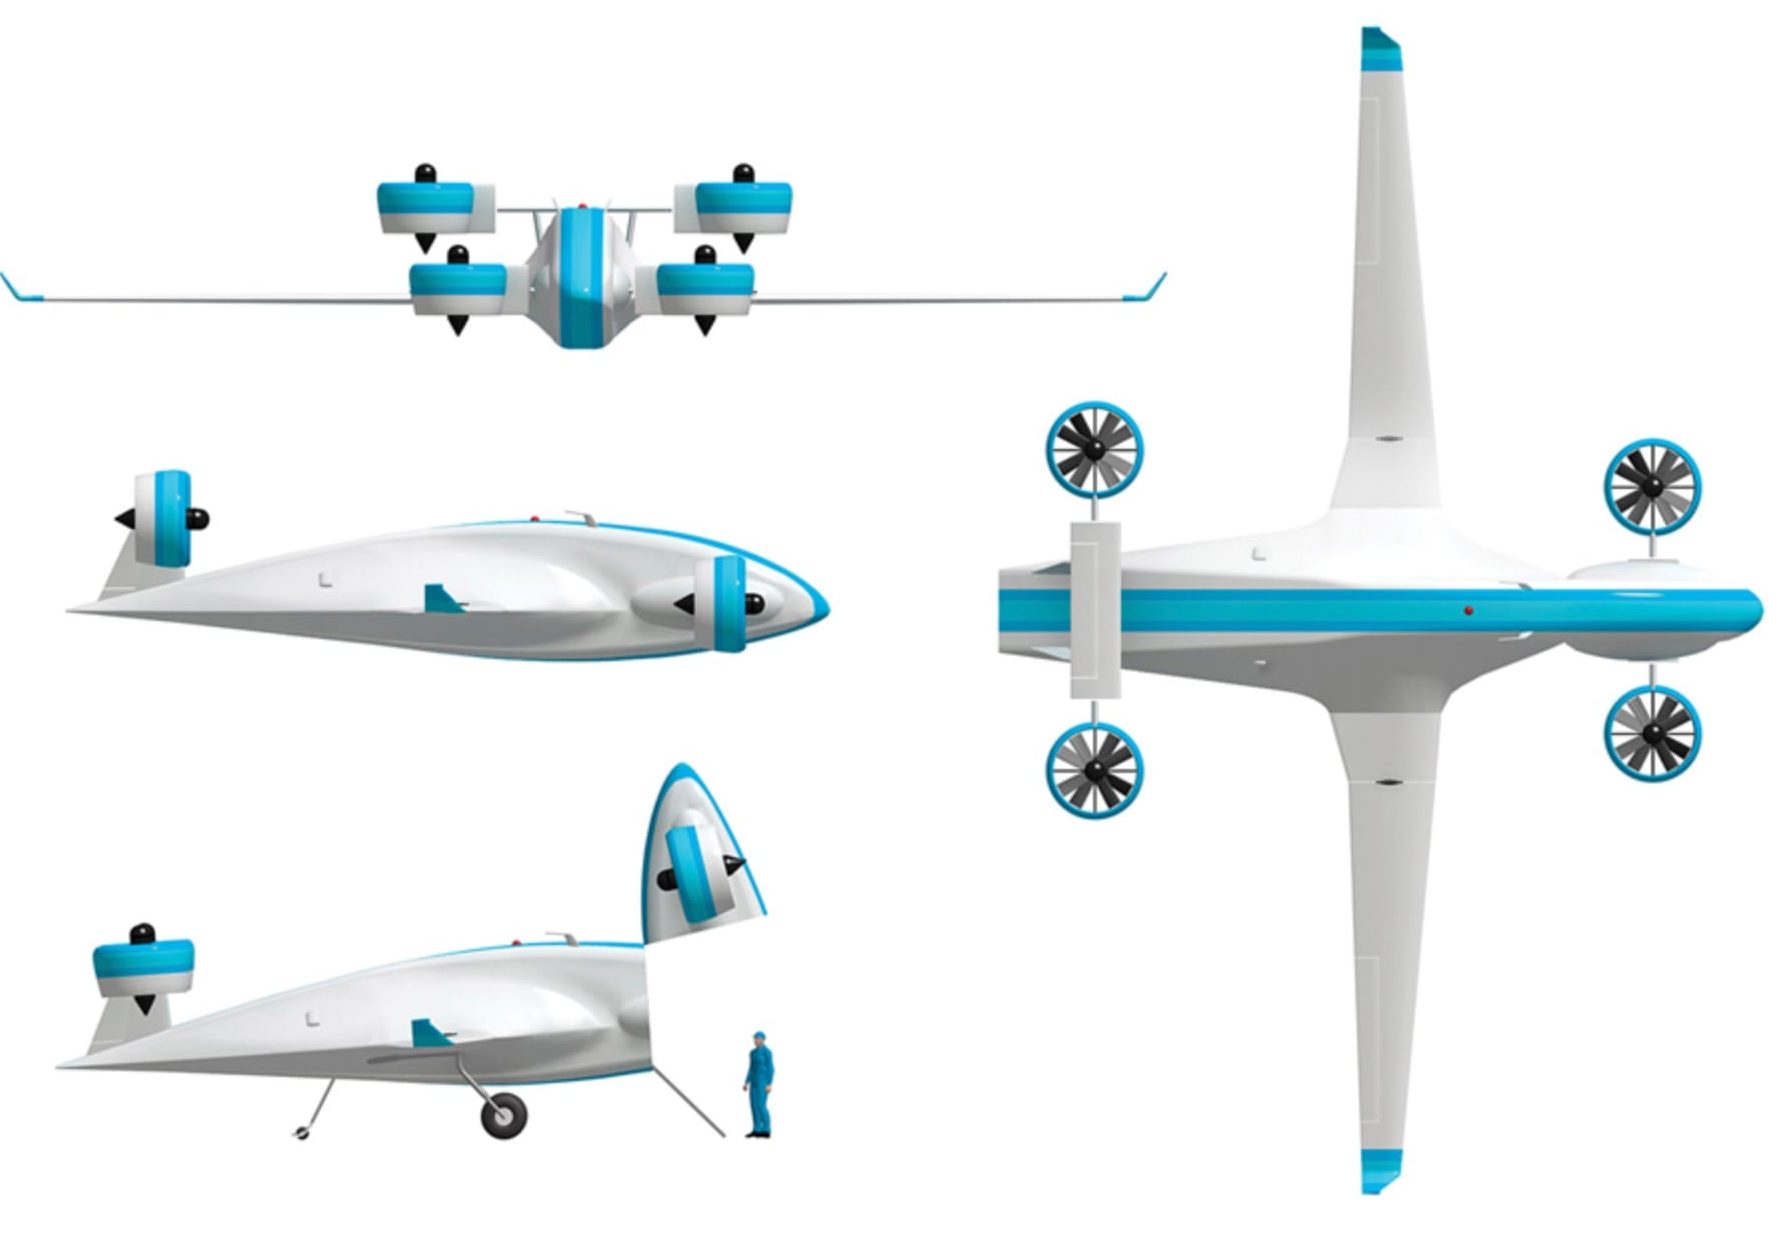 A detailed concept design plan for a blue and white cargo delivery drone.